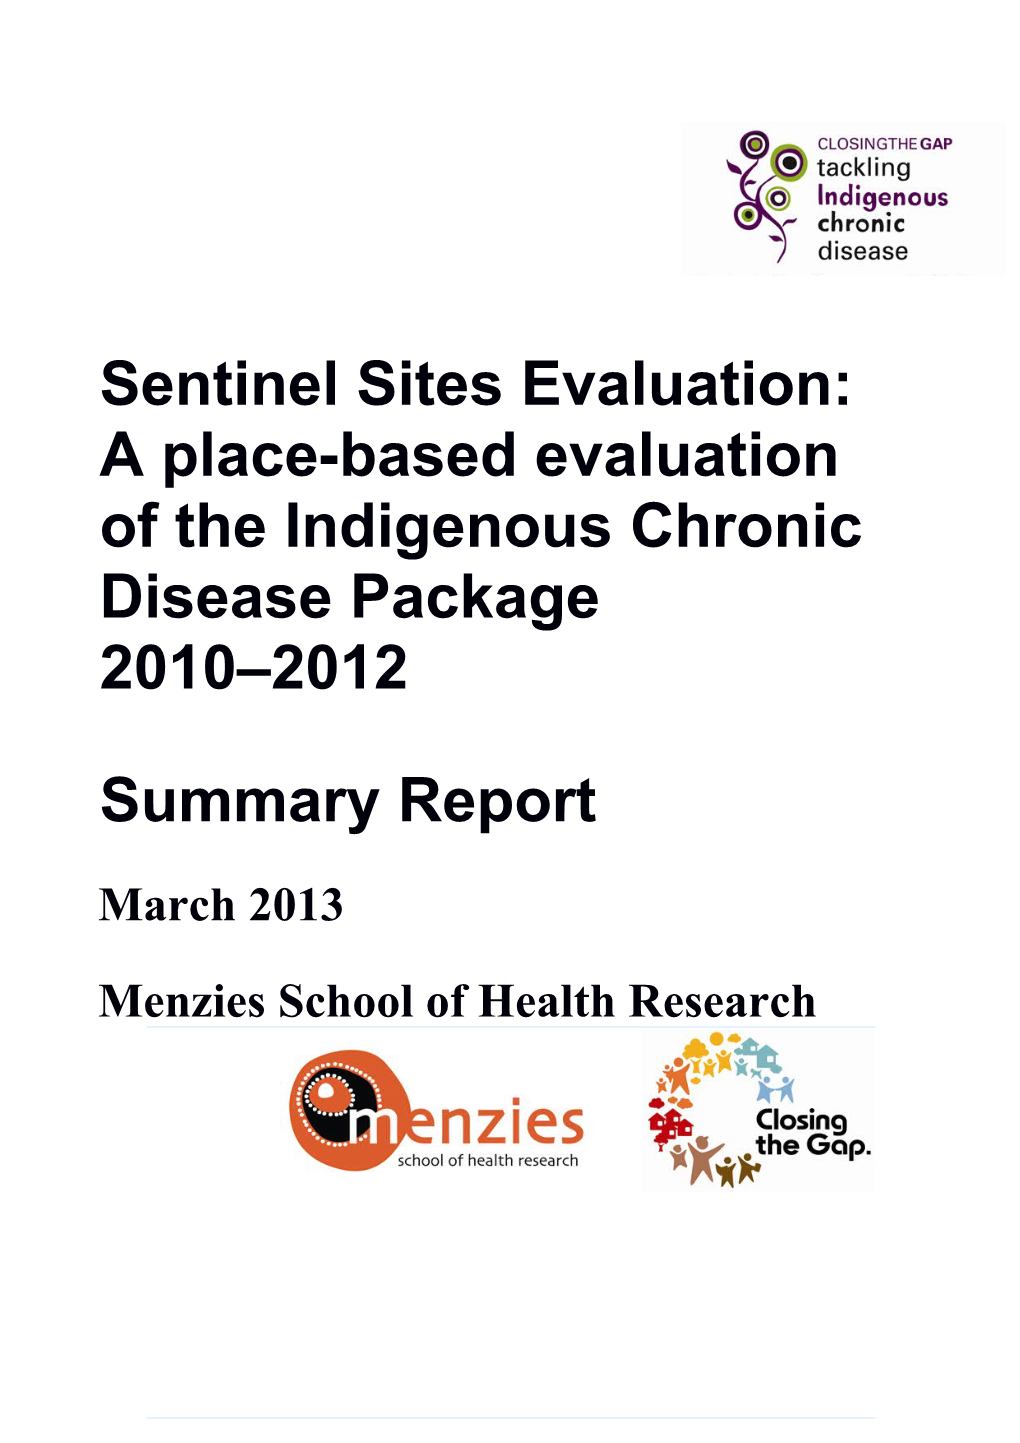 Sentinel Sites Evaluation: a Place-Based Evaluation of the Indigenous Chronic Disease Package